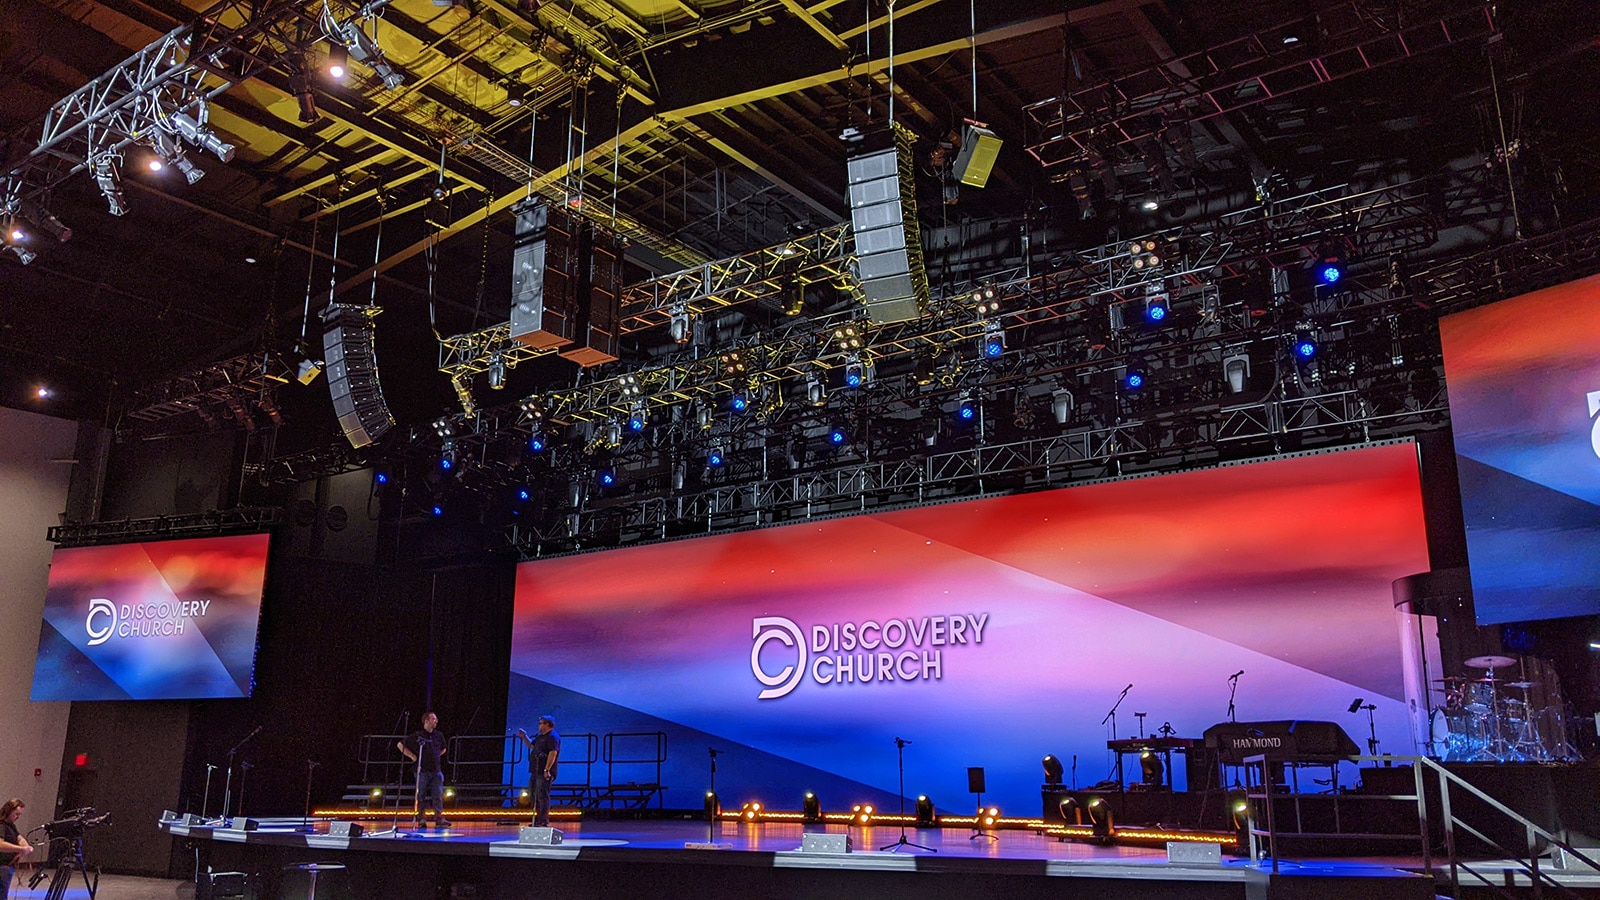 Meyer Sound LEOPARD Elevates the Worship Experience at Orlando’s Discovery Church